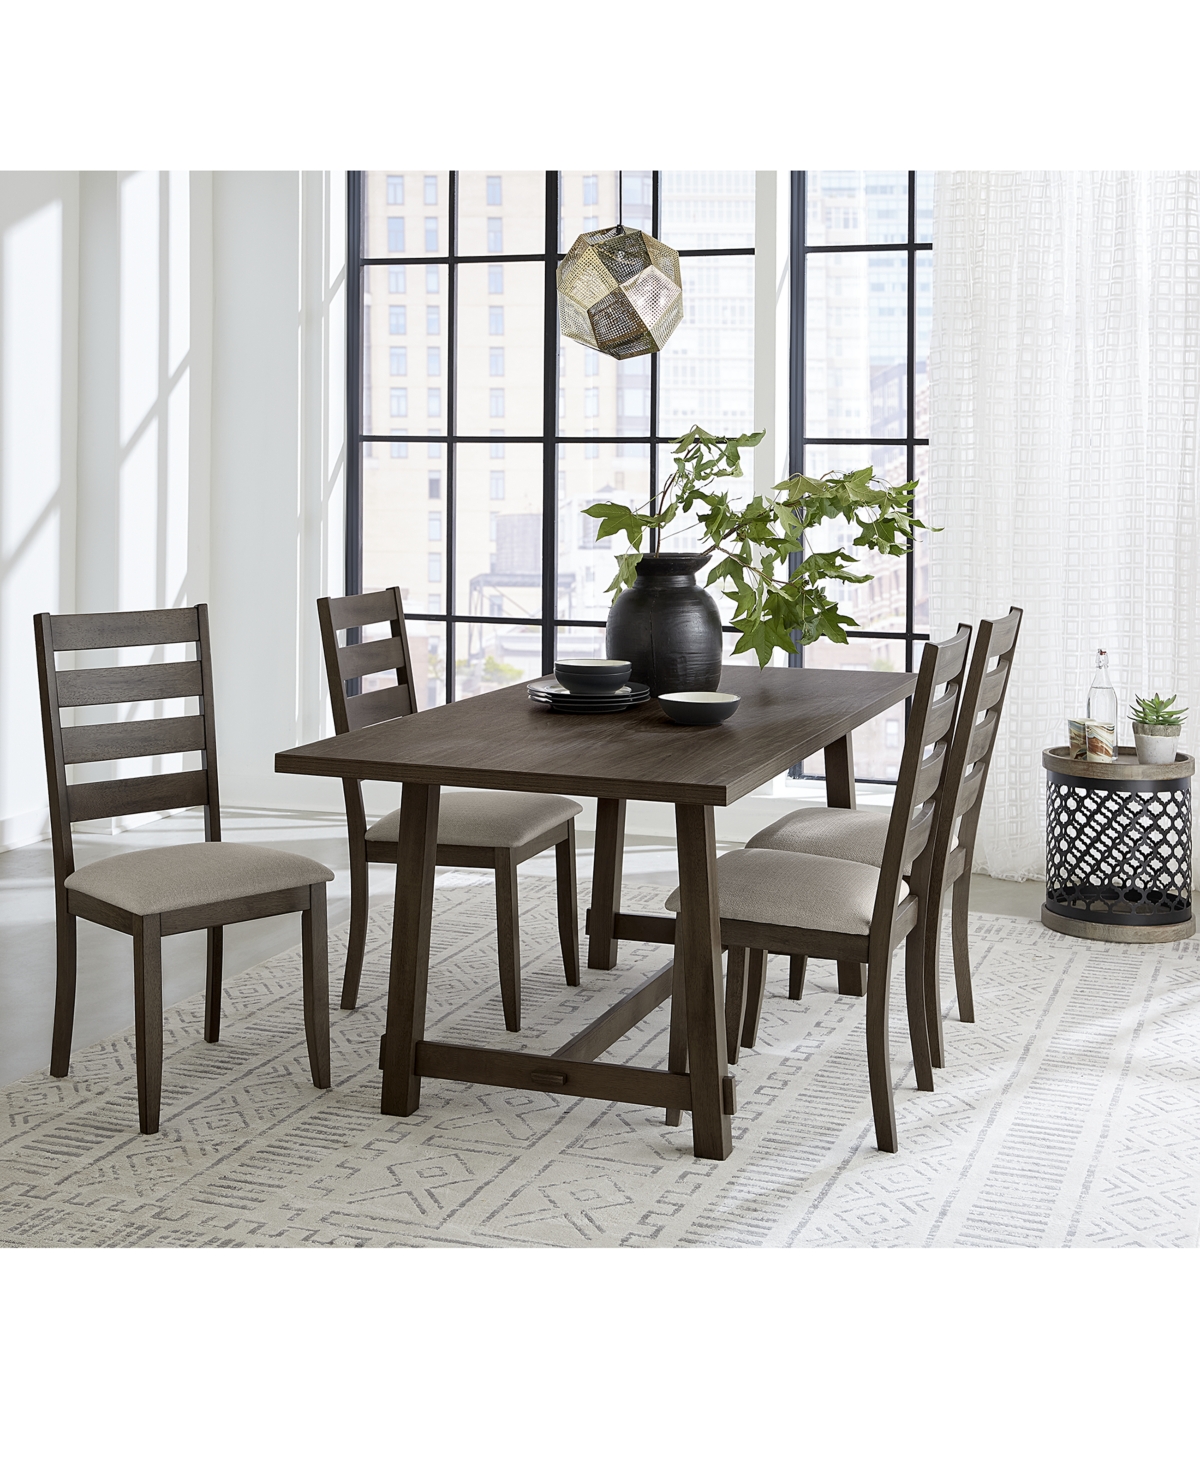 Max Meadows Laminate 5-Pc Dining Set (Trestle Table + 4 Side Chairs)